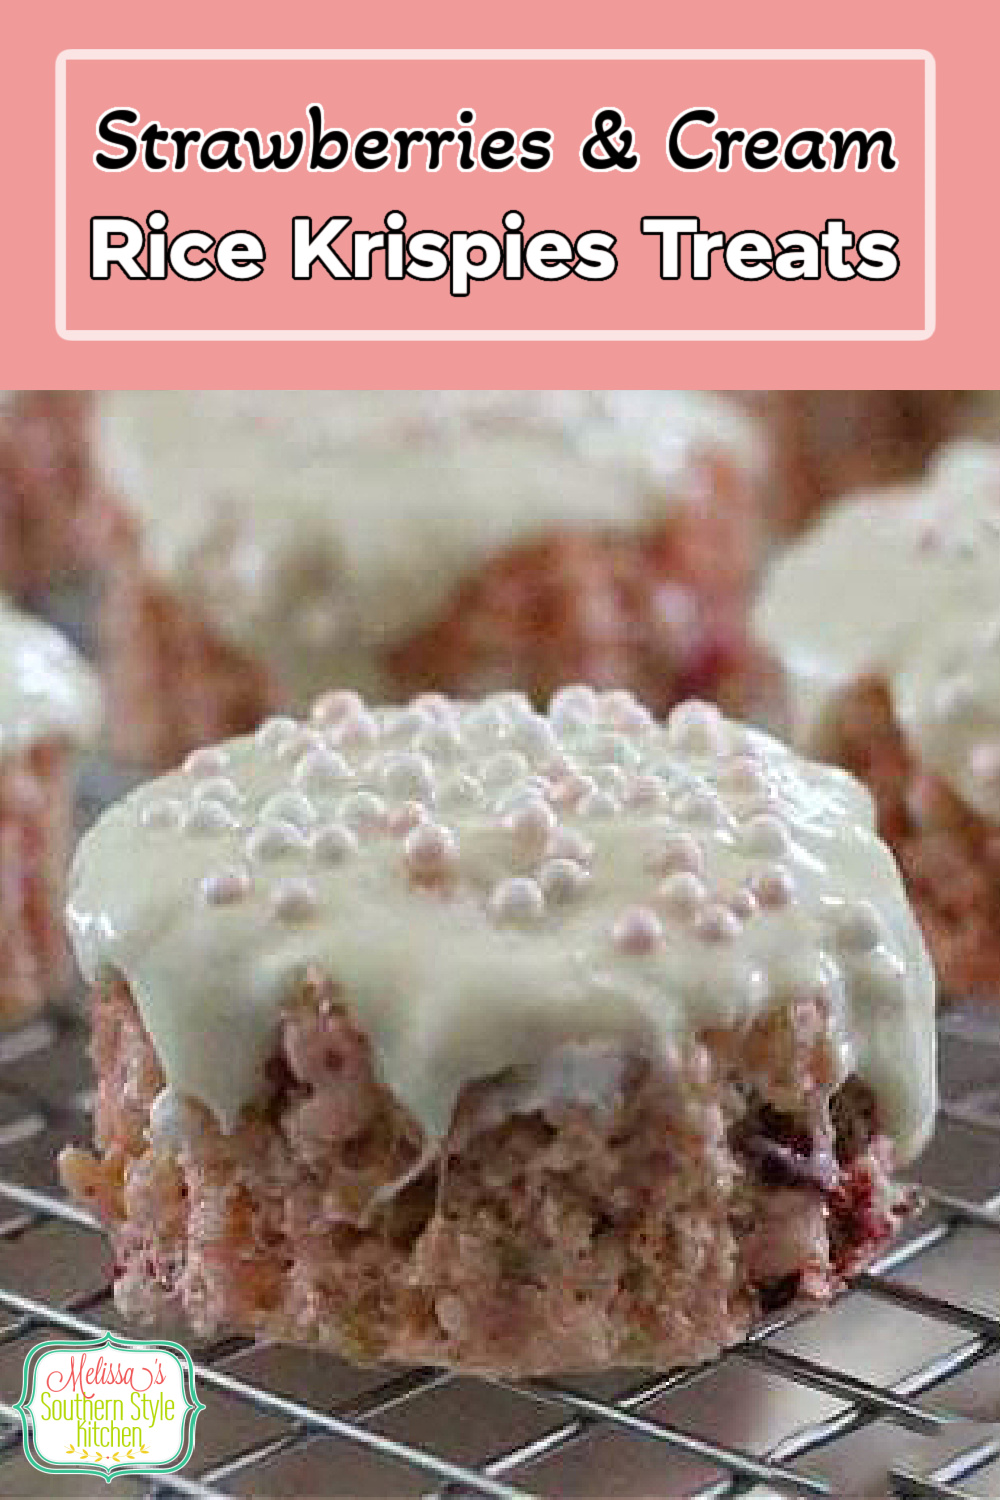 Sweet Strawberries and Cream Rice Krispies Treats will upgrade your next batch of rice krispies treats. #strawberryricekrispietreats #ricekrispietreats #strawerryhies #strawberriesandcream #easyrecipes #desserts #dessertfoodrecipes #southernrecipes #strawberry